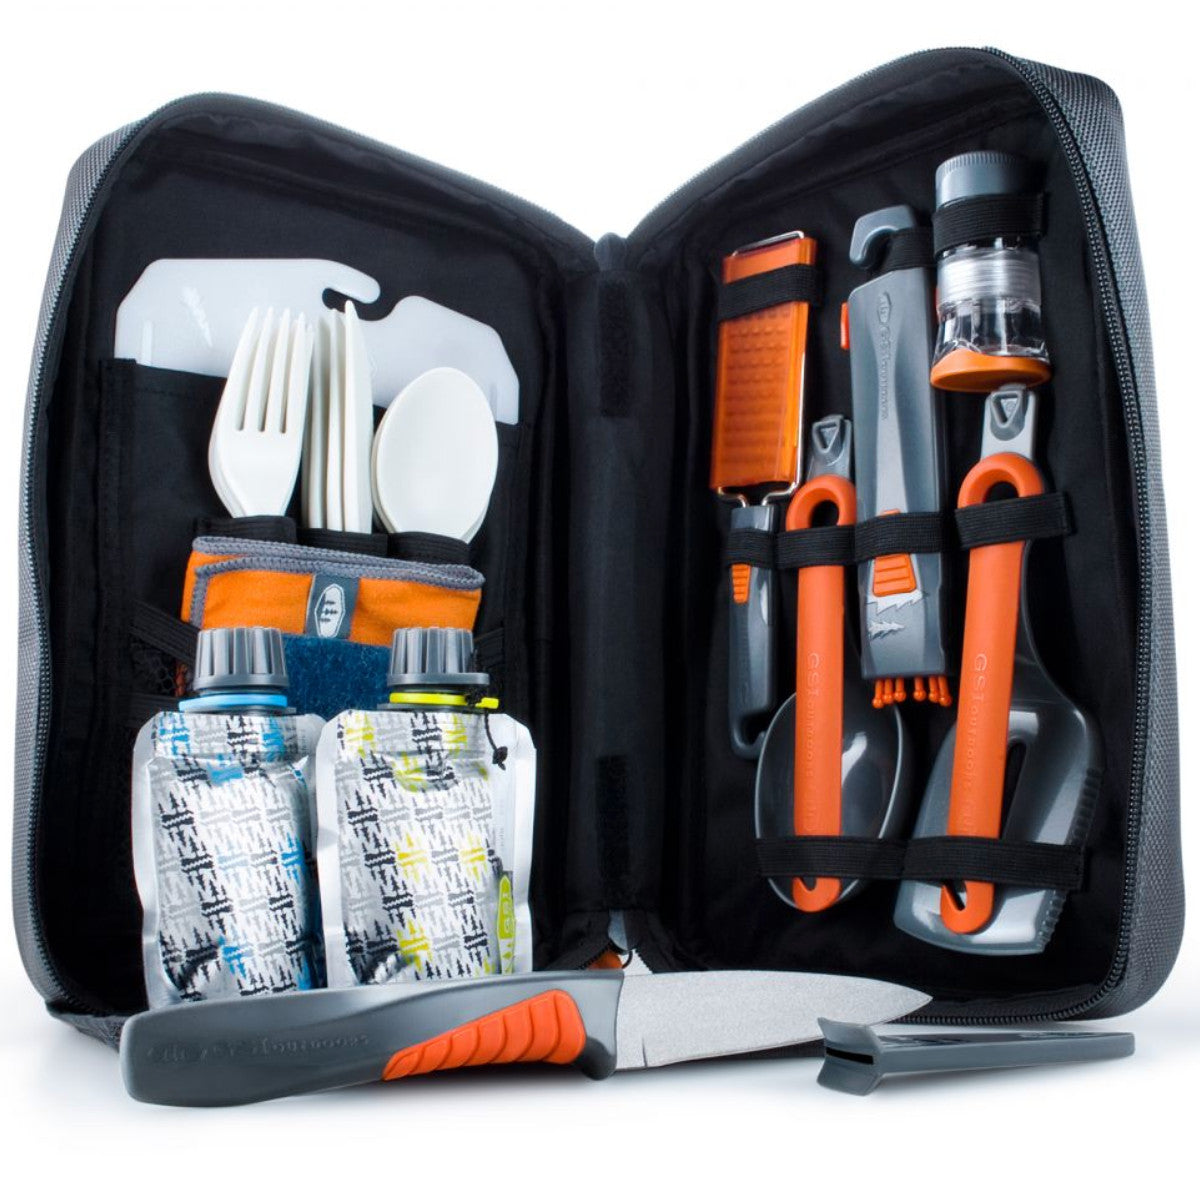 GSI Destination Kitchen 24, showing storage pack open with camping cutlery inside